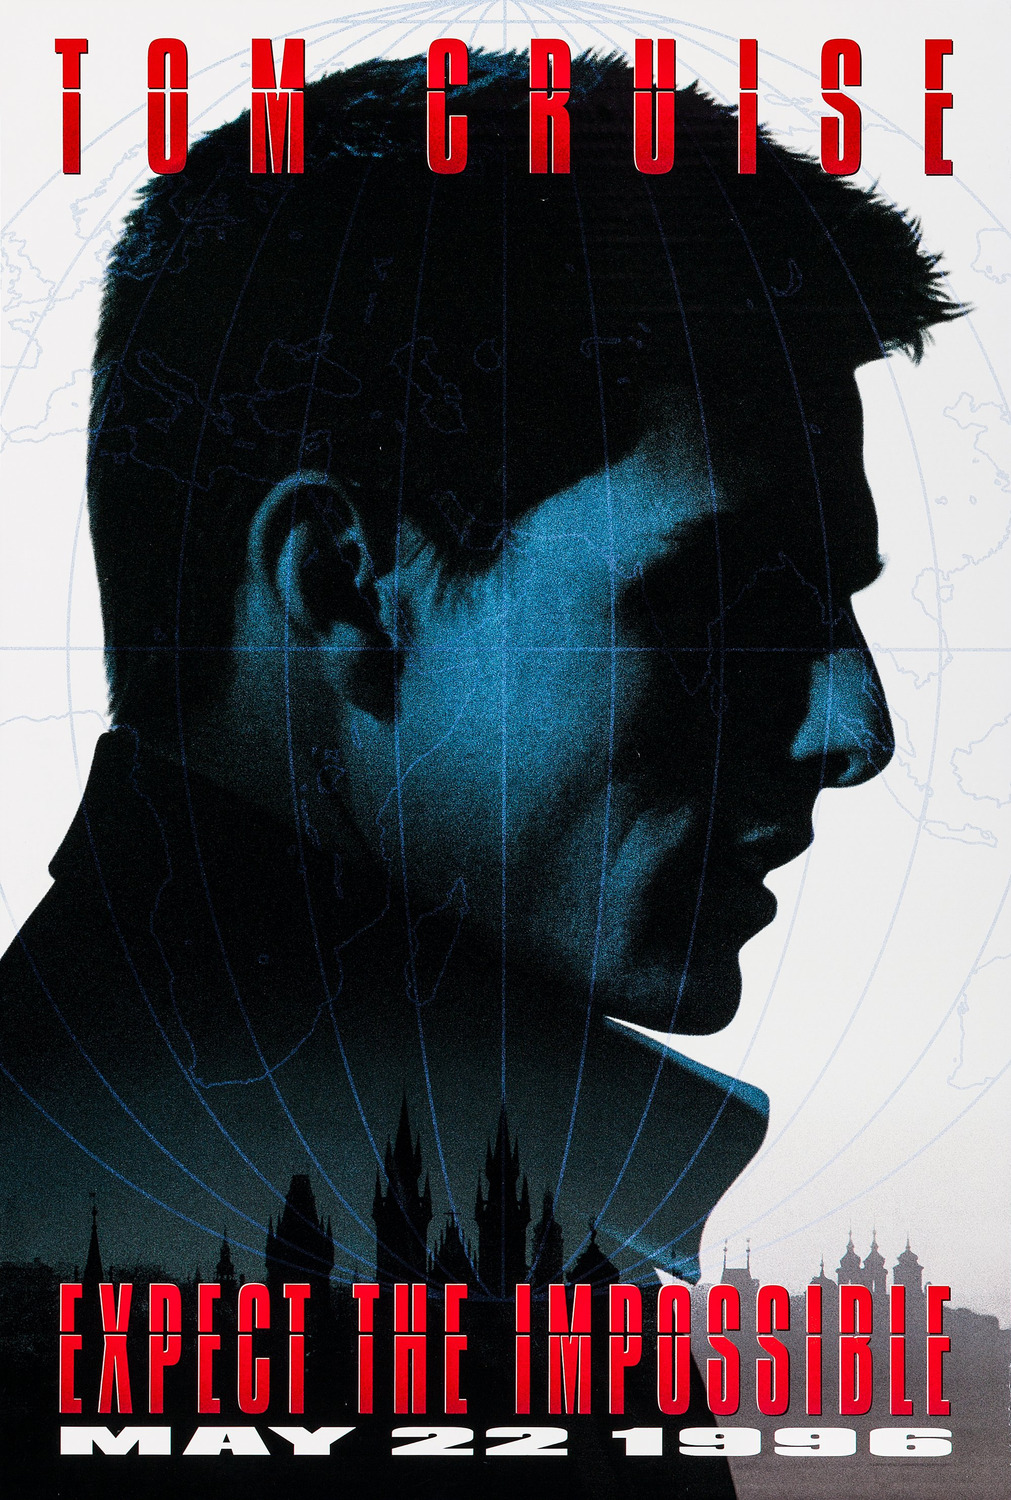 Extra Large Movie Poster Image for Mission: Impossible (#1 of 2)